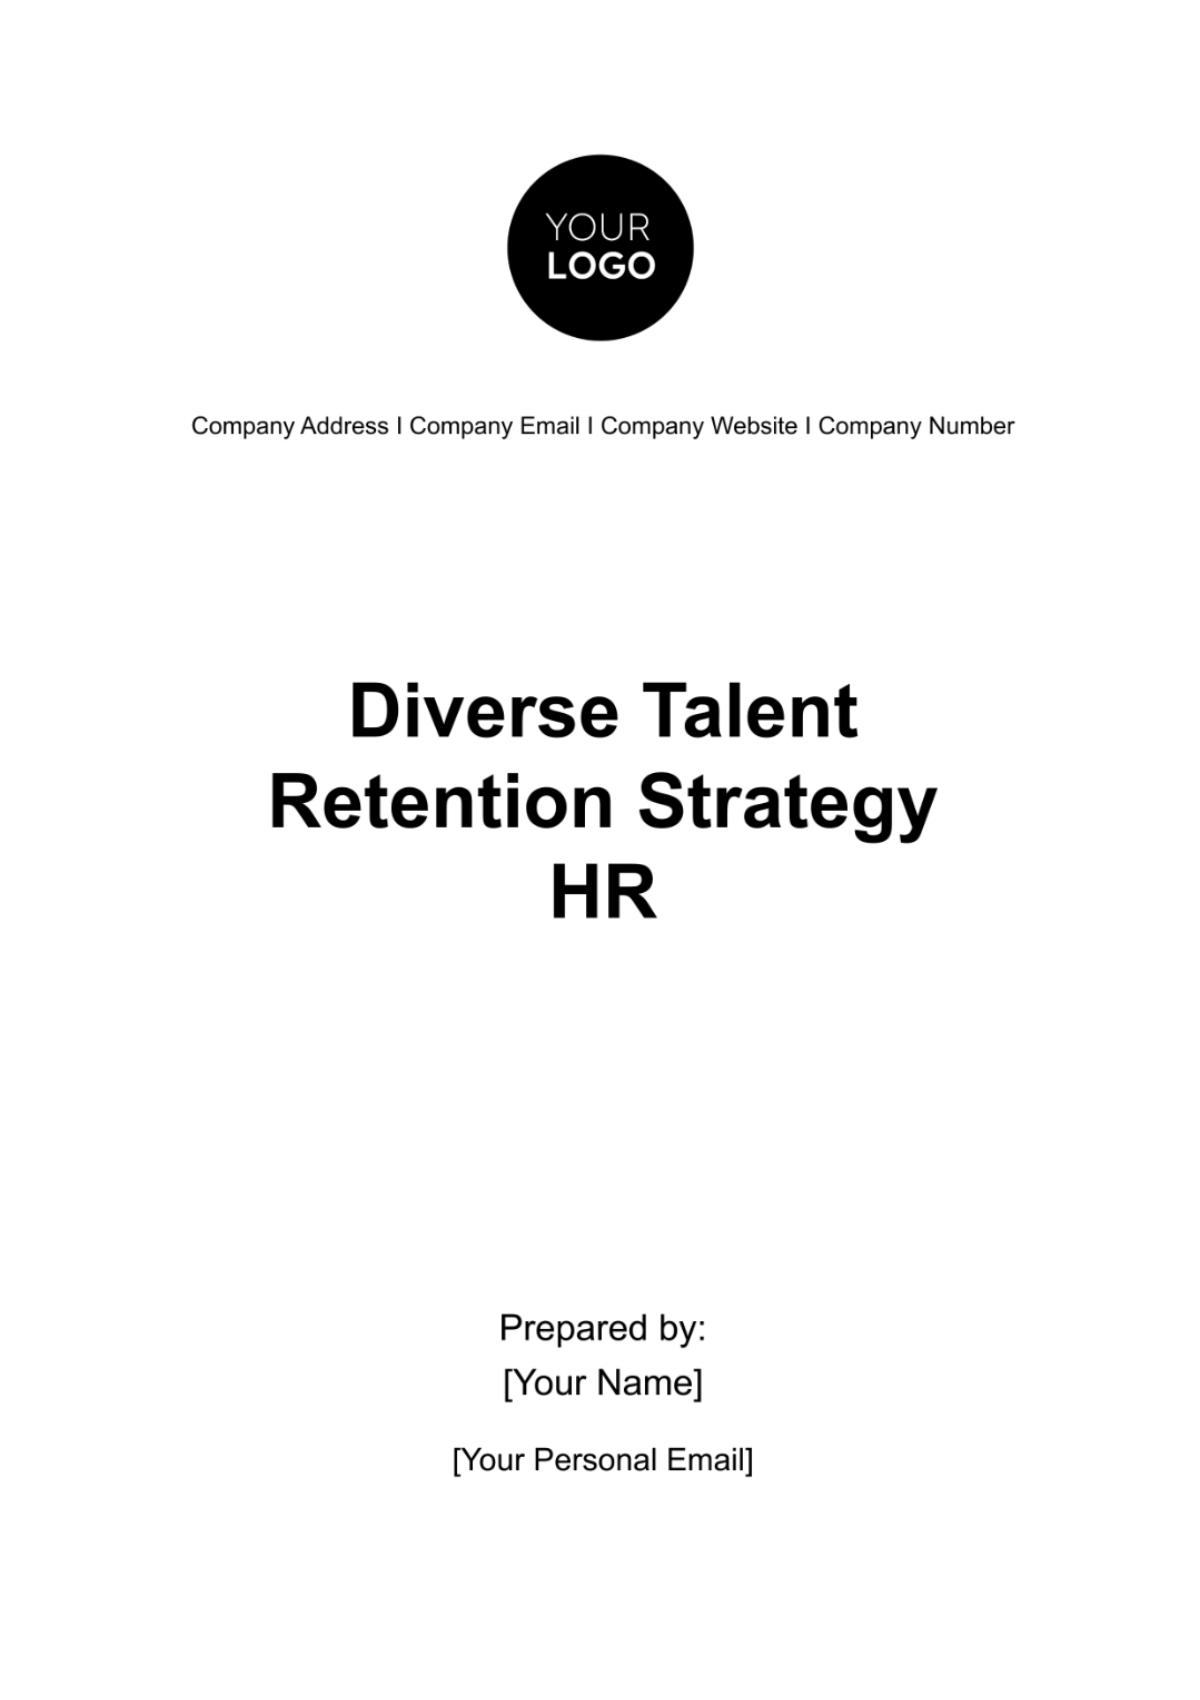 Free Diverse Talent Retention Strategy HR Template